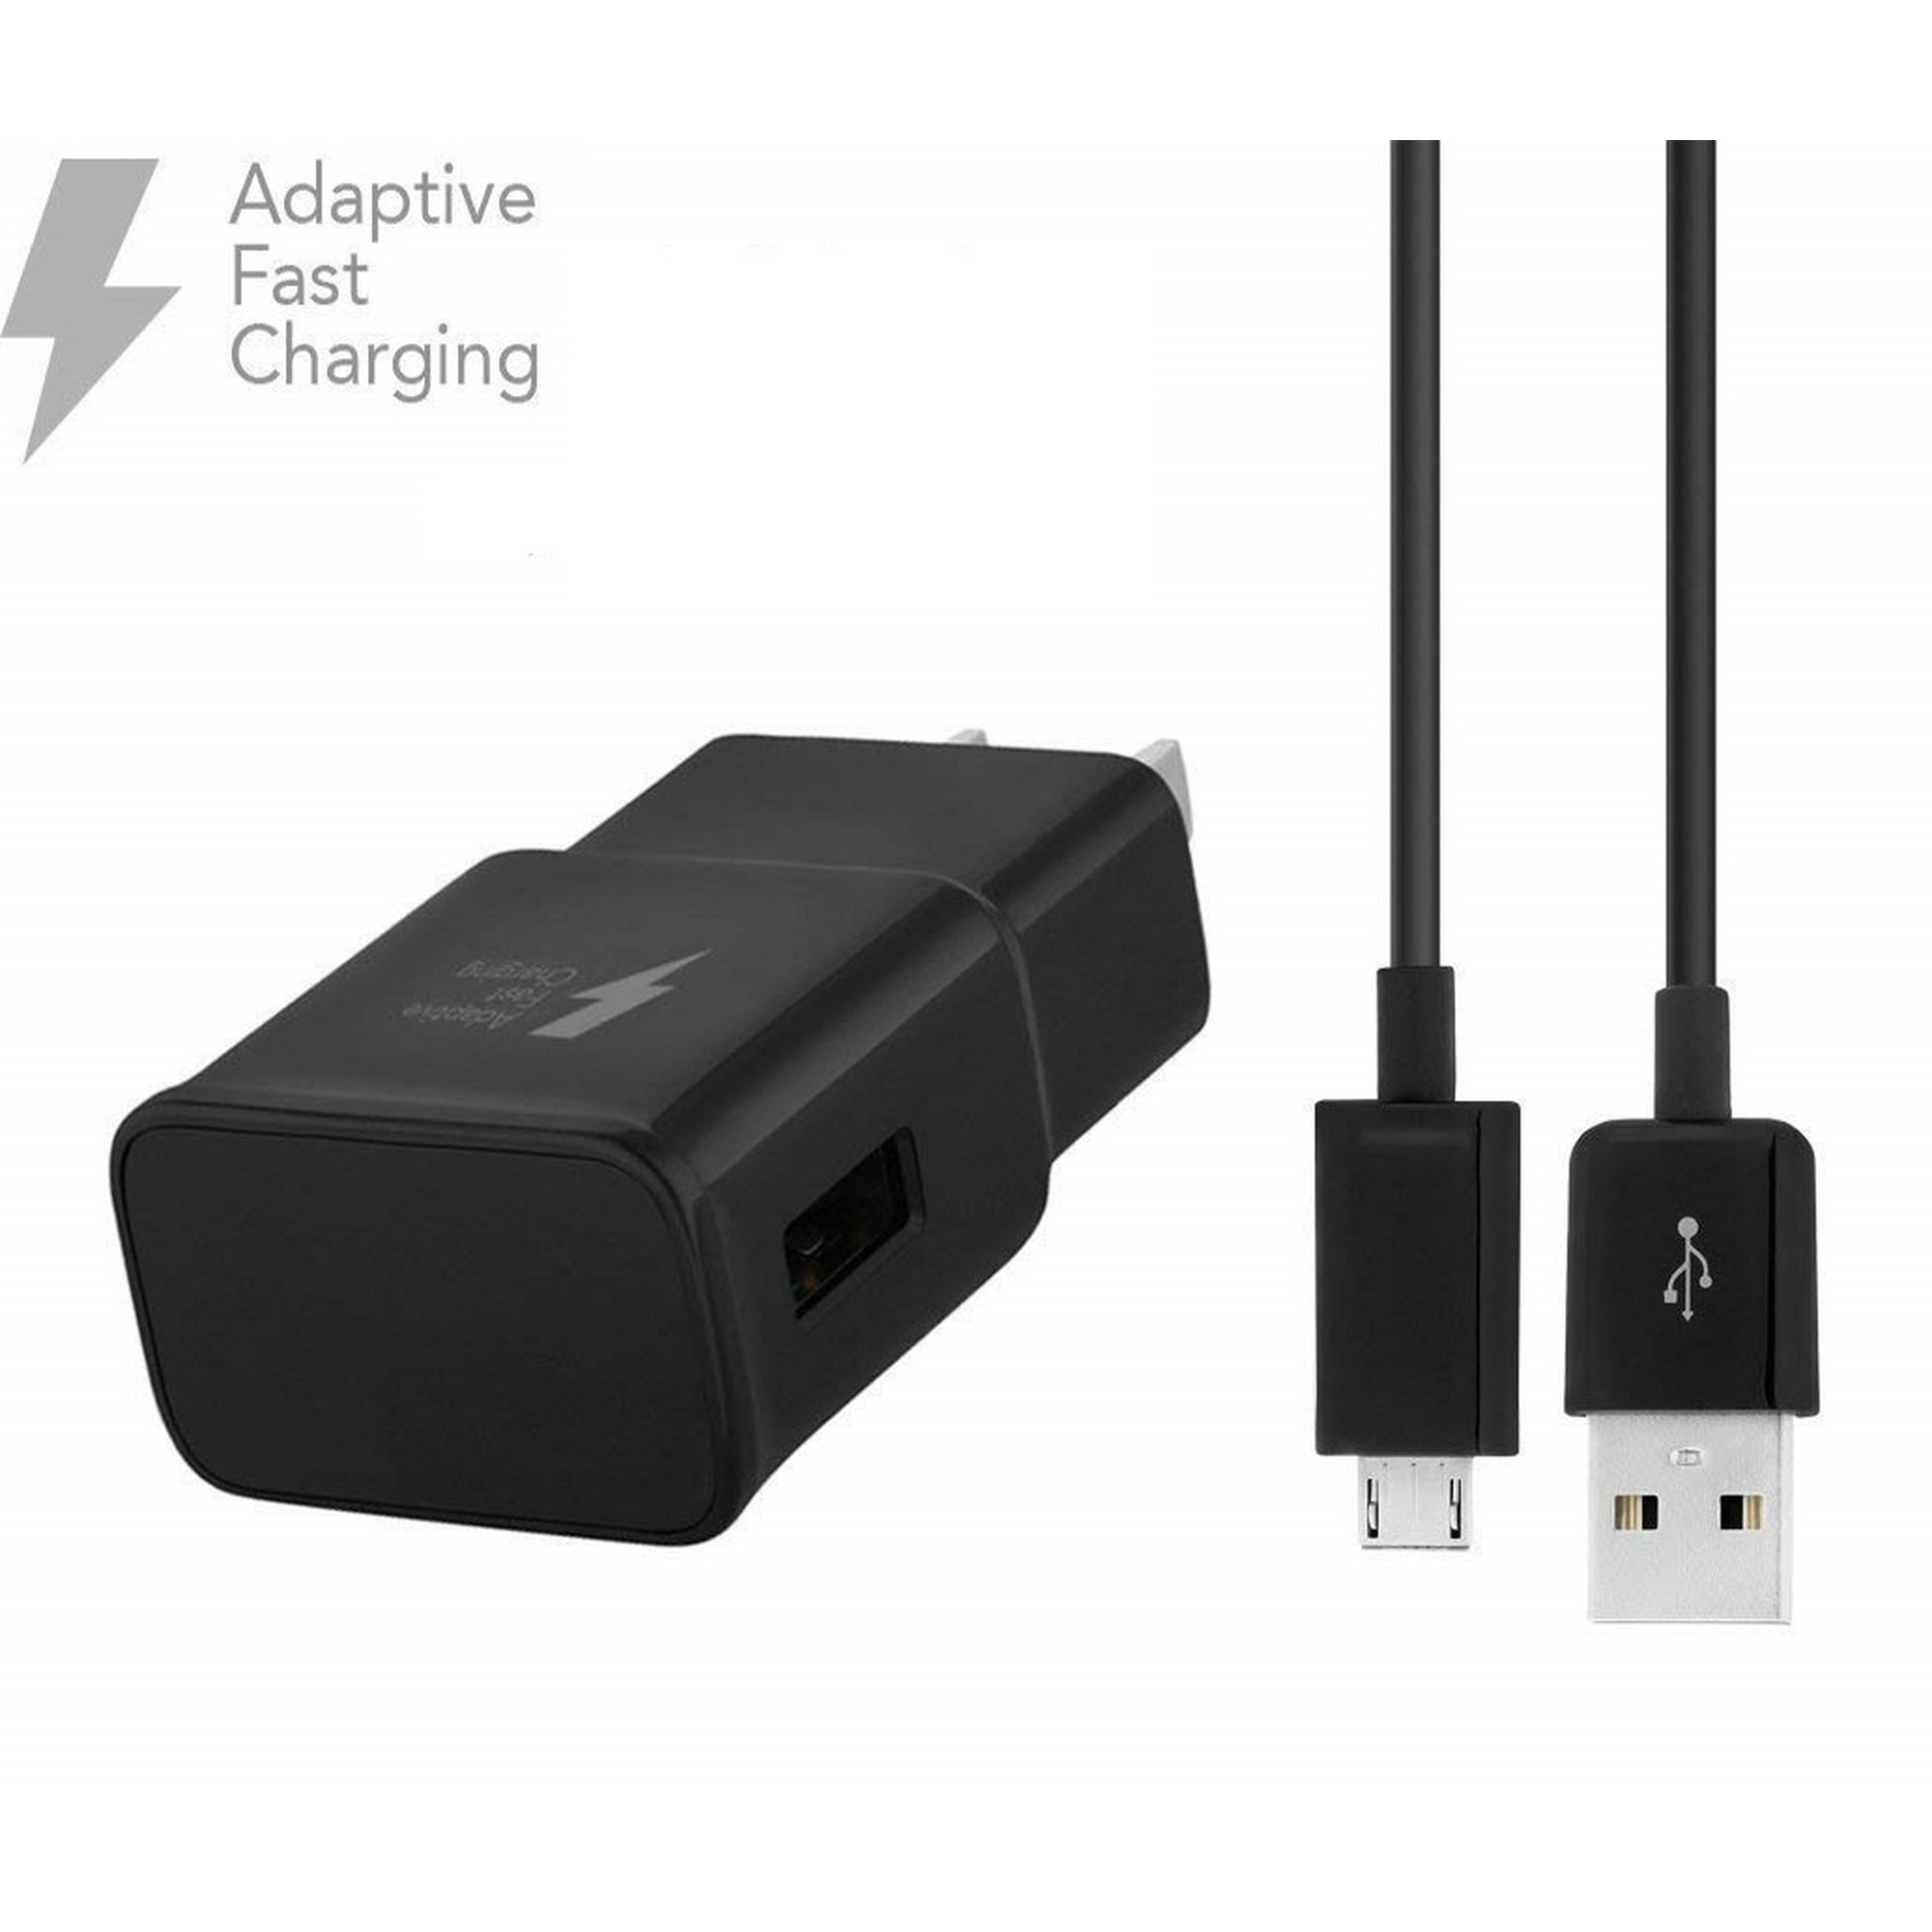 2 PACK - OEM Adaptive Fast Charger For Samsung Galaxy S7 Edge Cell Phones  [Wall Charger + 5 FT Micro USB Cable] - True Digital Adaptive Fast Charging  - Black | Walmart Canada